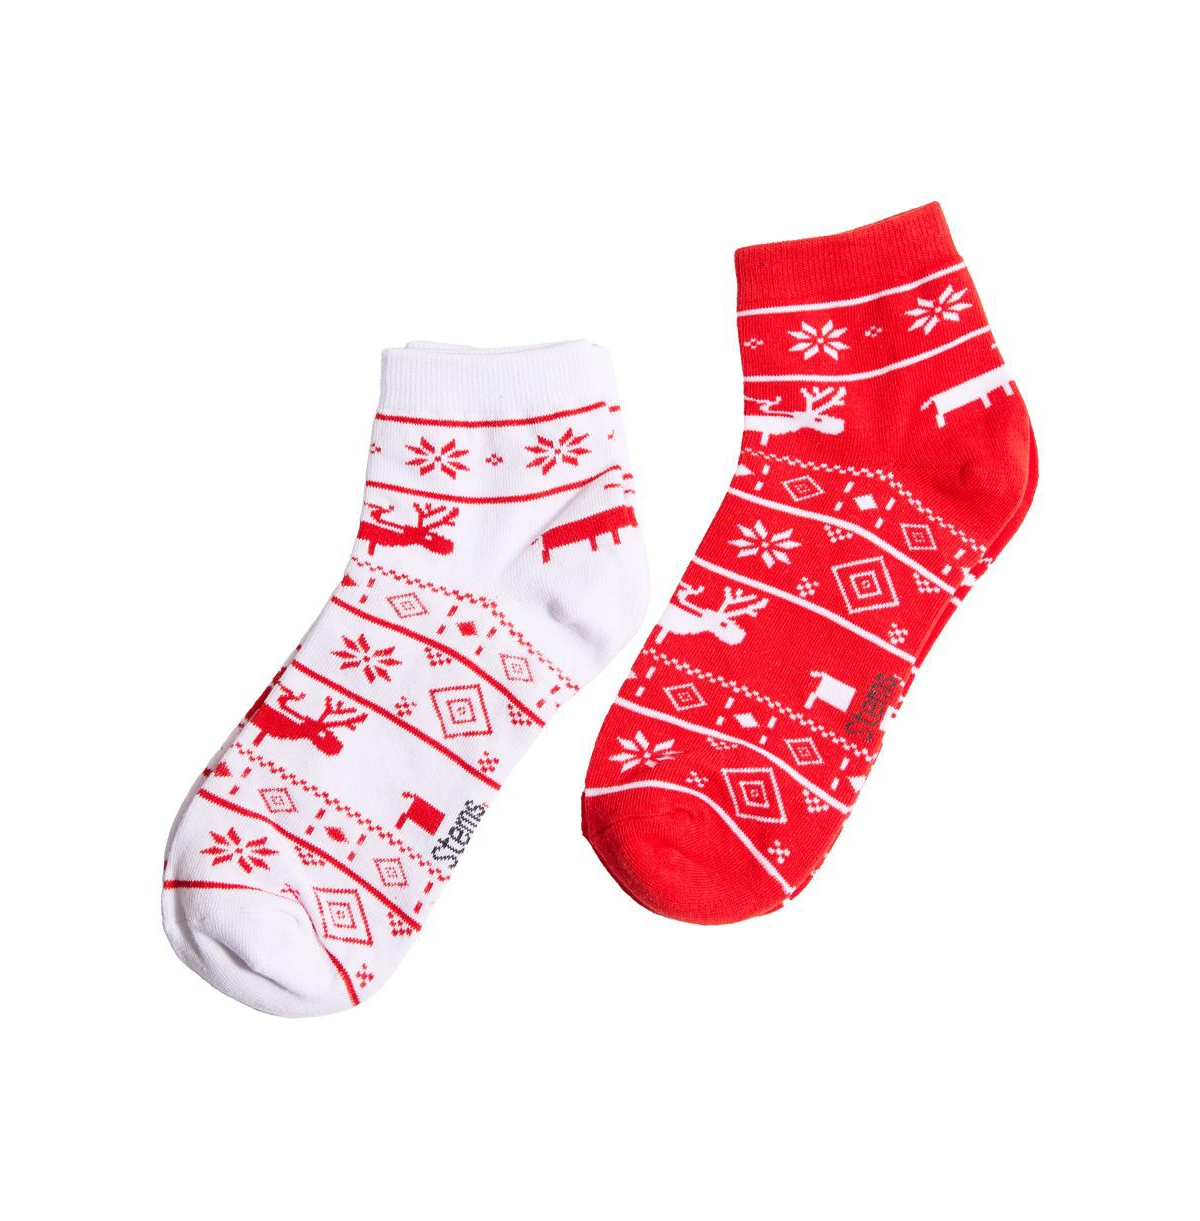 Reindeer Ankle Socks Two Pack - Red/white